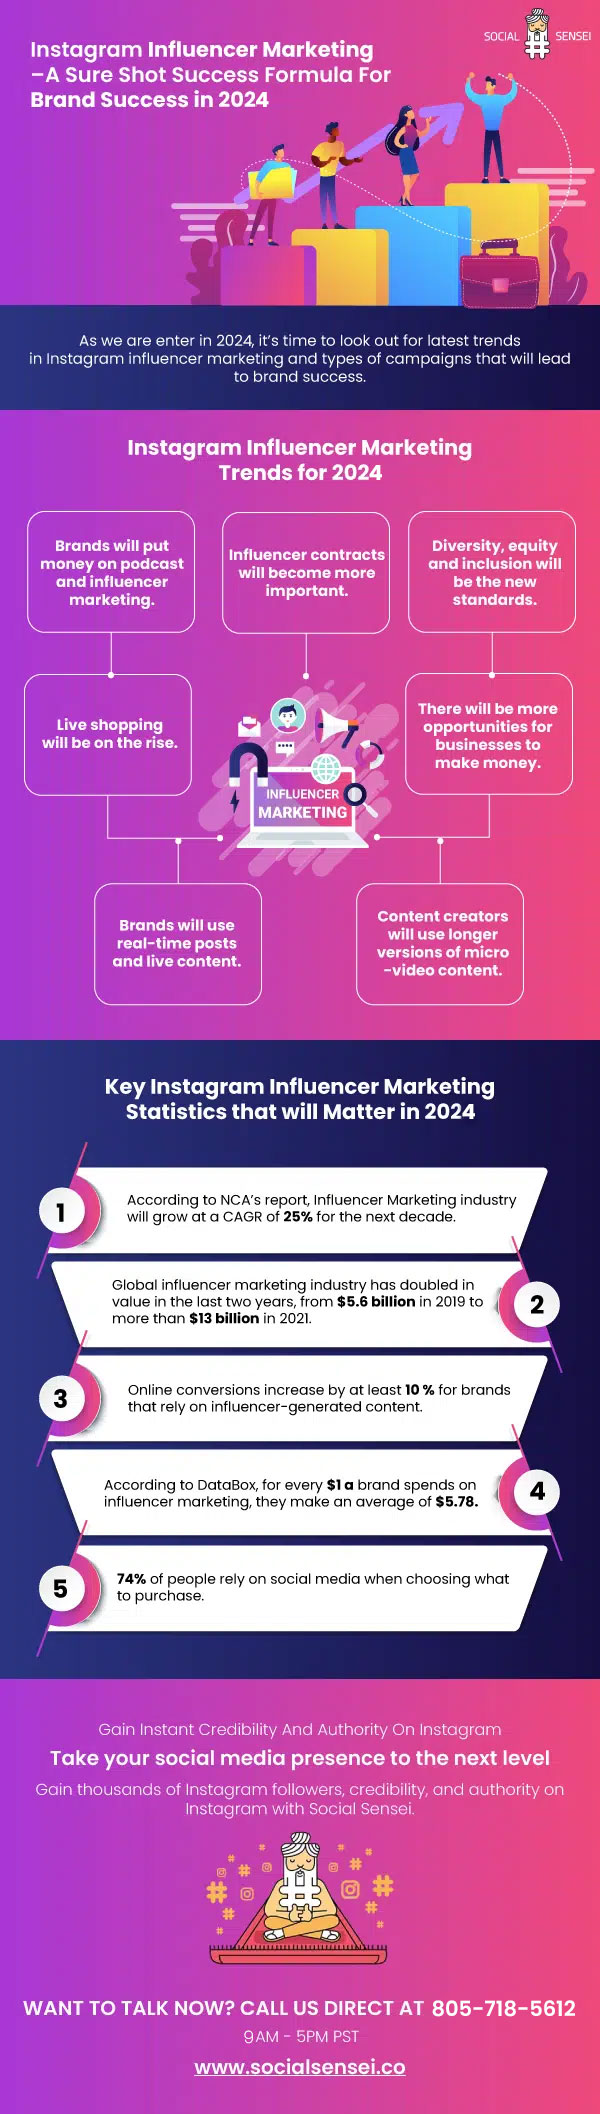 The Rise of Instagram Advertising: Key Insights and Predictions for 2024 - The impact of influencer marketing on Instagram advertising